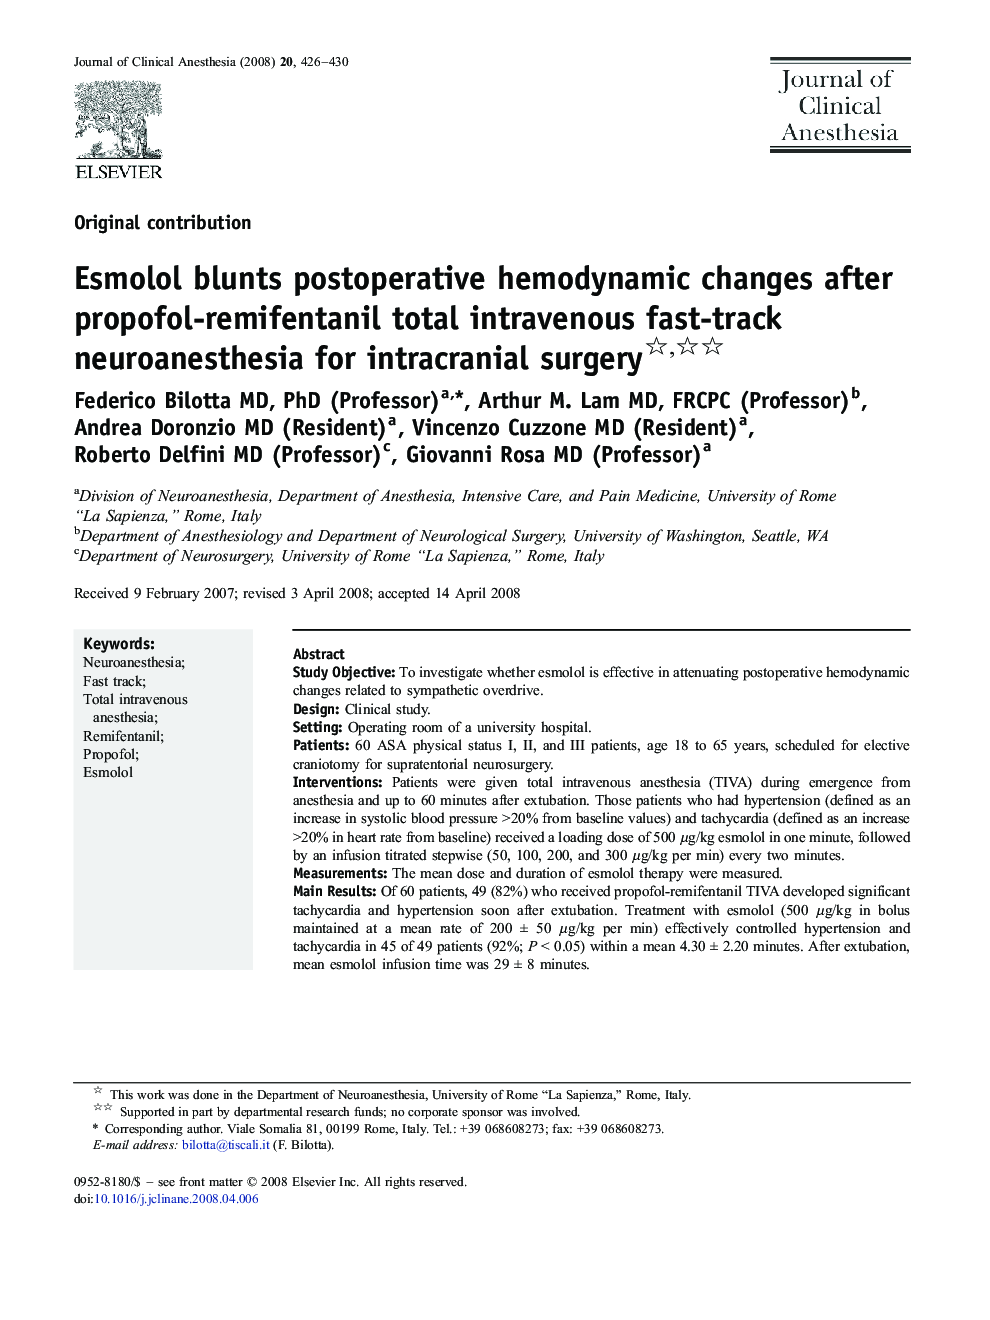 Esmolol blunts postoperative hemodynamic changes after propofol-remifentanil total intravenous fast-track neuroanesthesia for intracranial surgery 